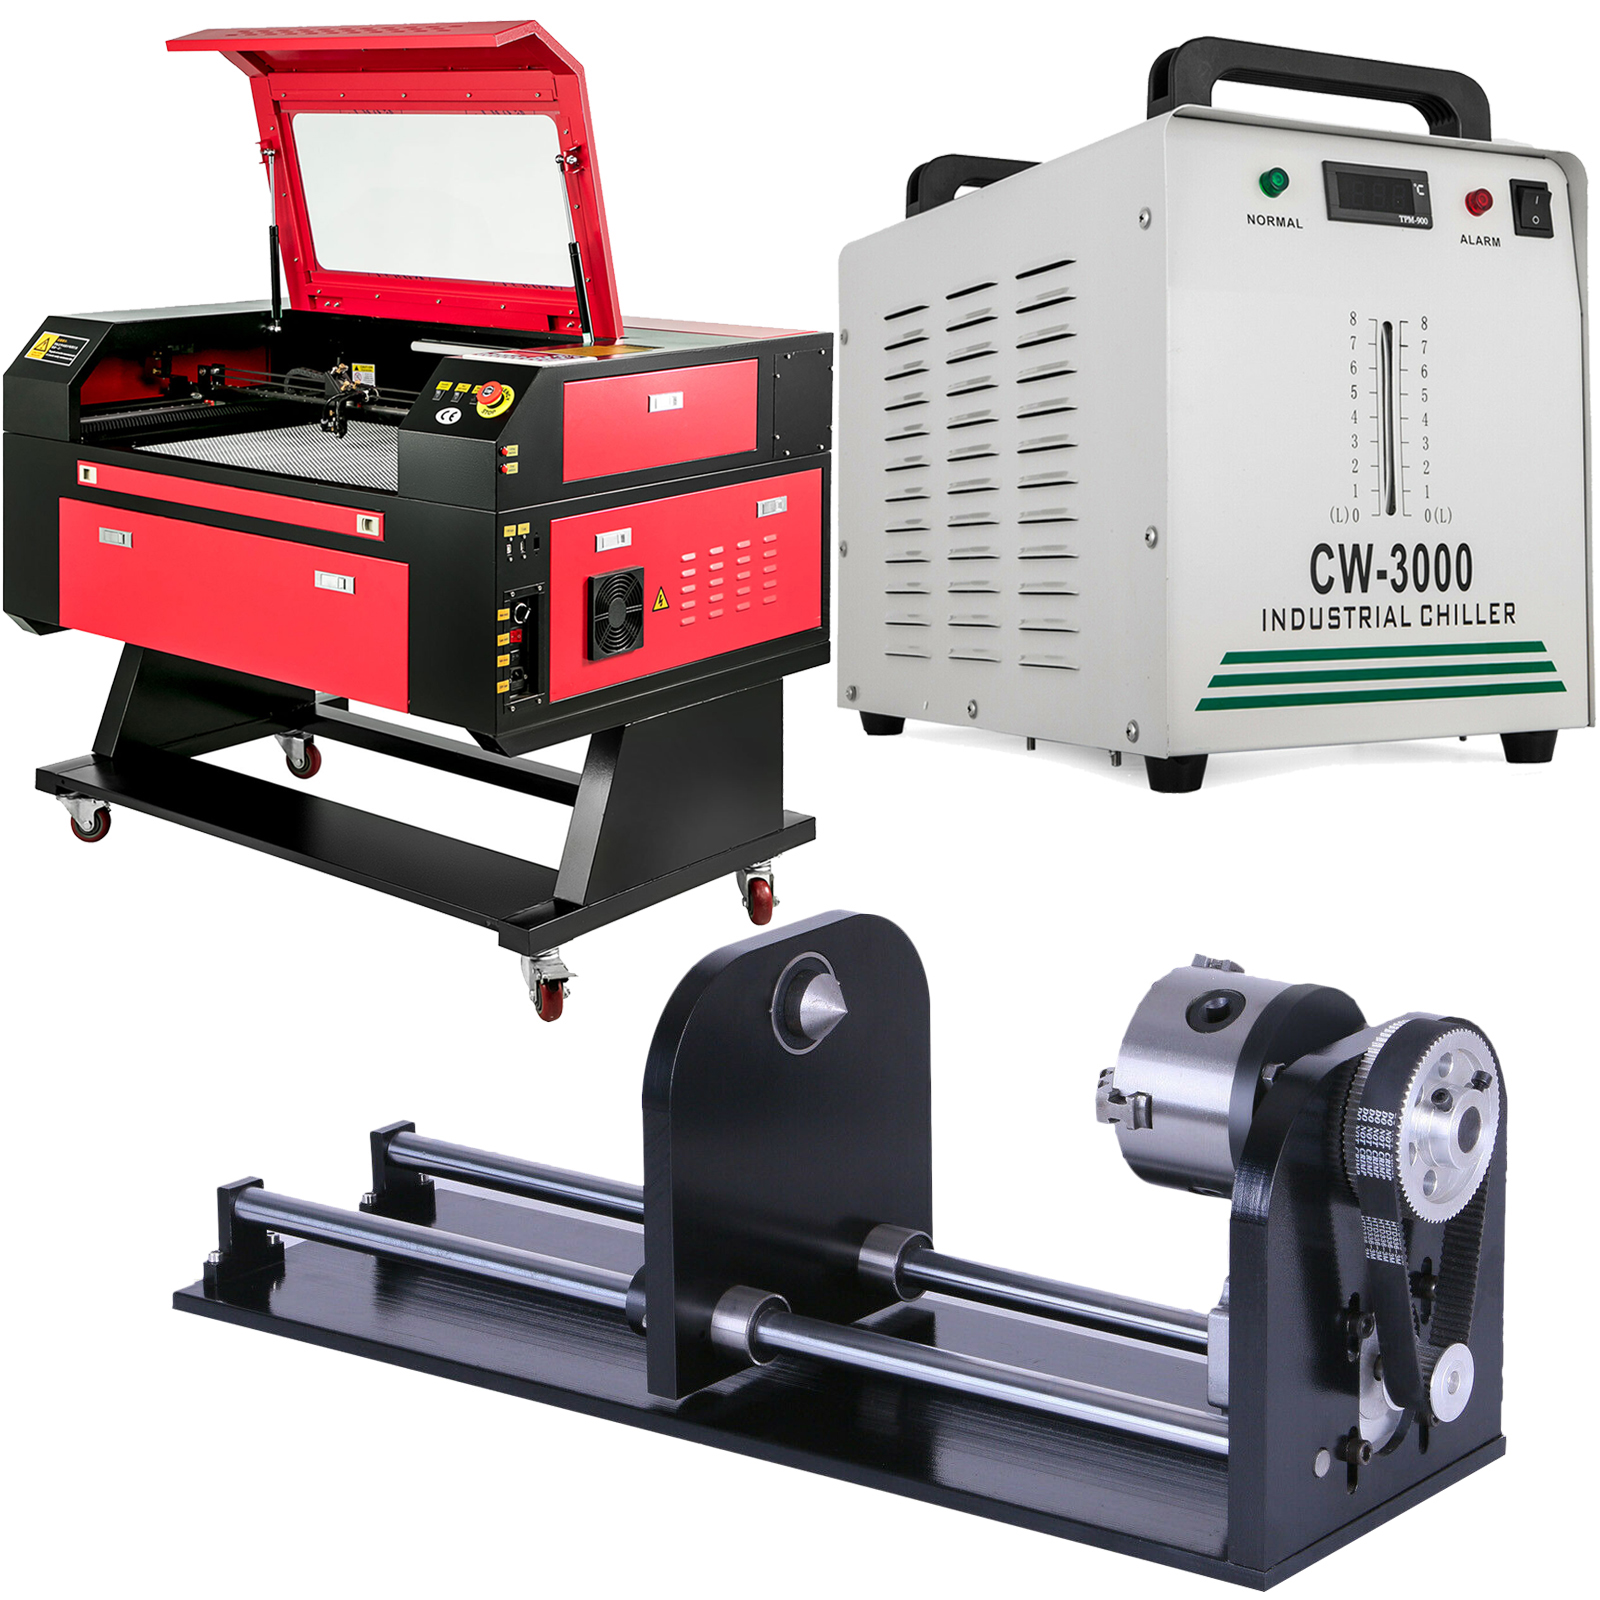 80W CO2 Laser Engraver CW-3000 Industrial Water-Cooled Chiller + CNC ...